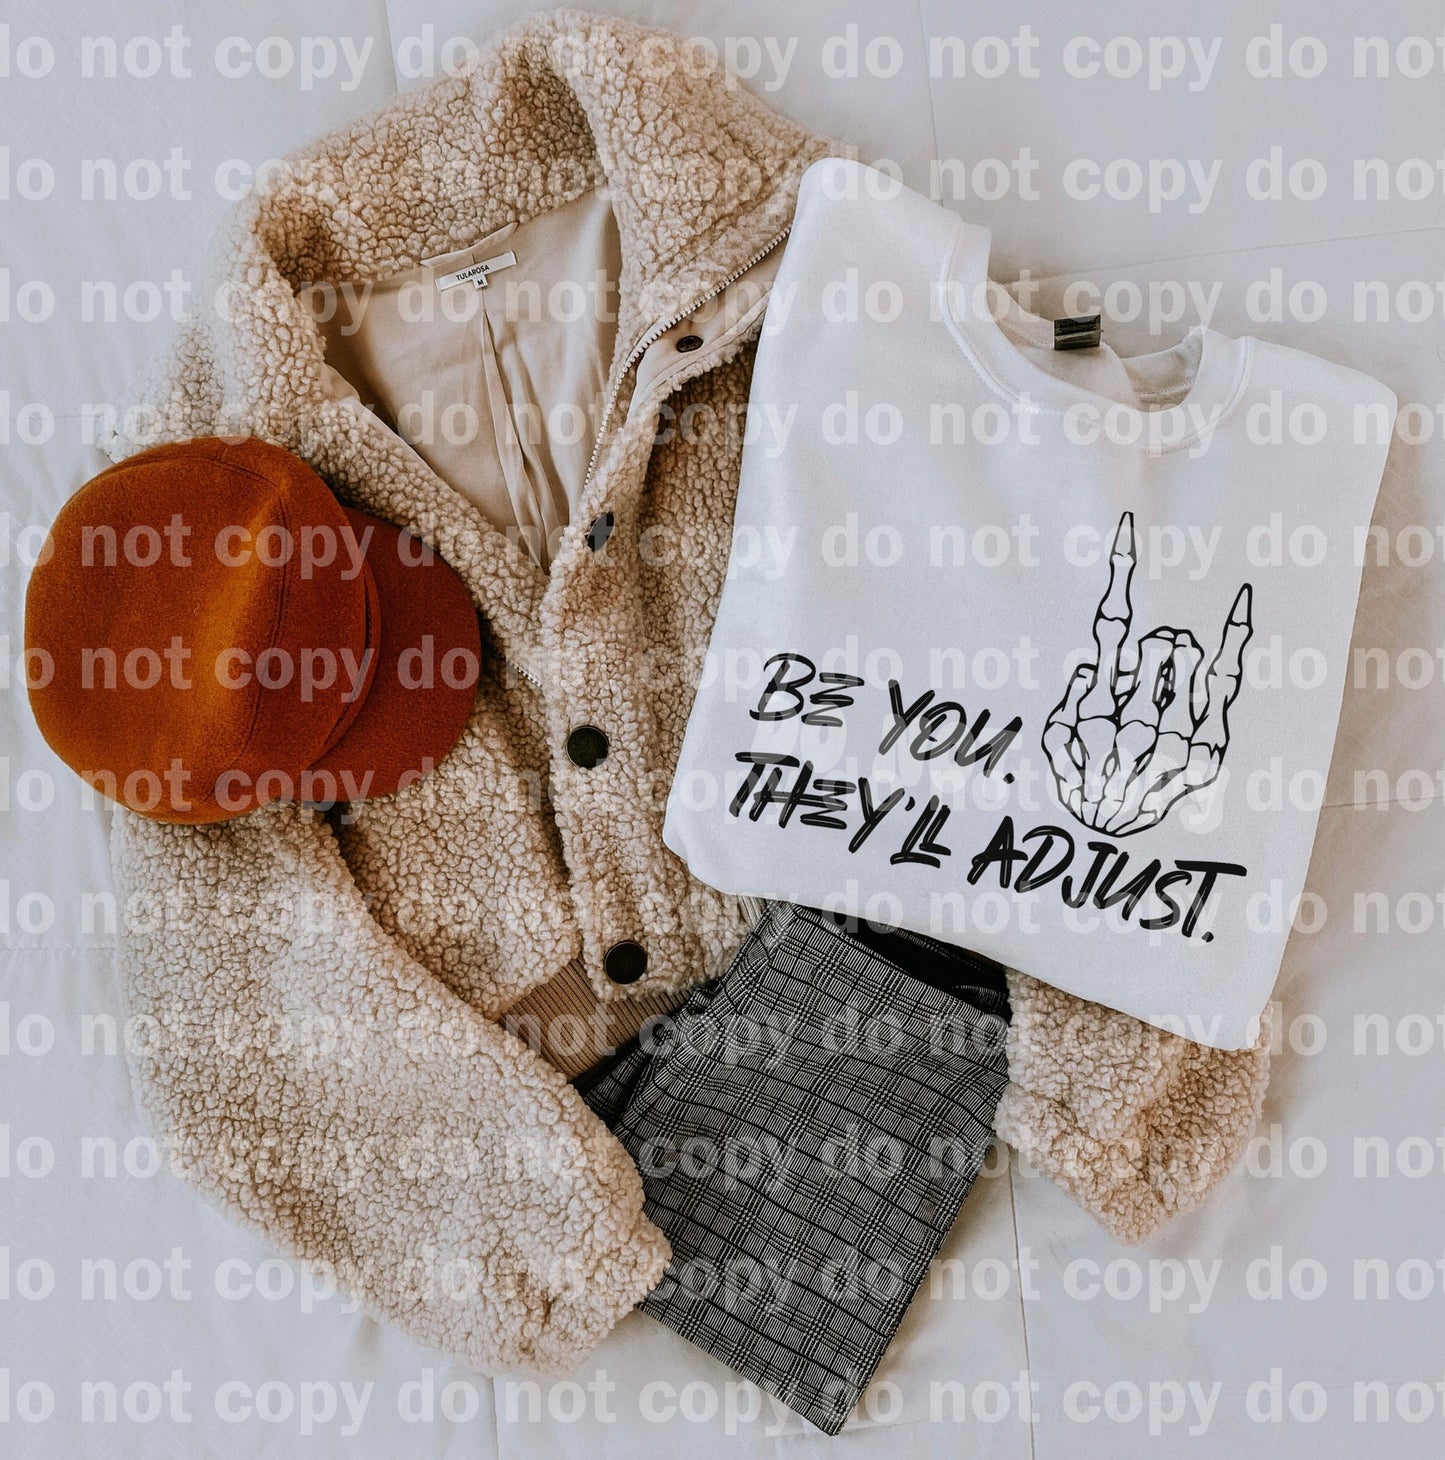 Be You They'll Adjust Dream Print or Sublimation Print